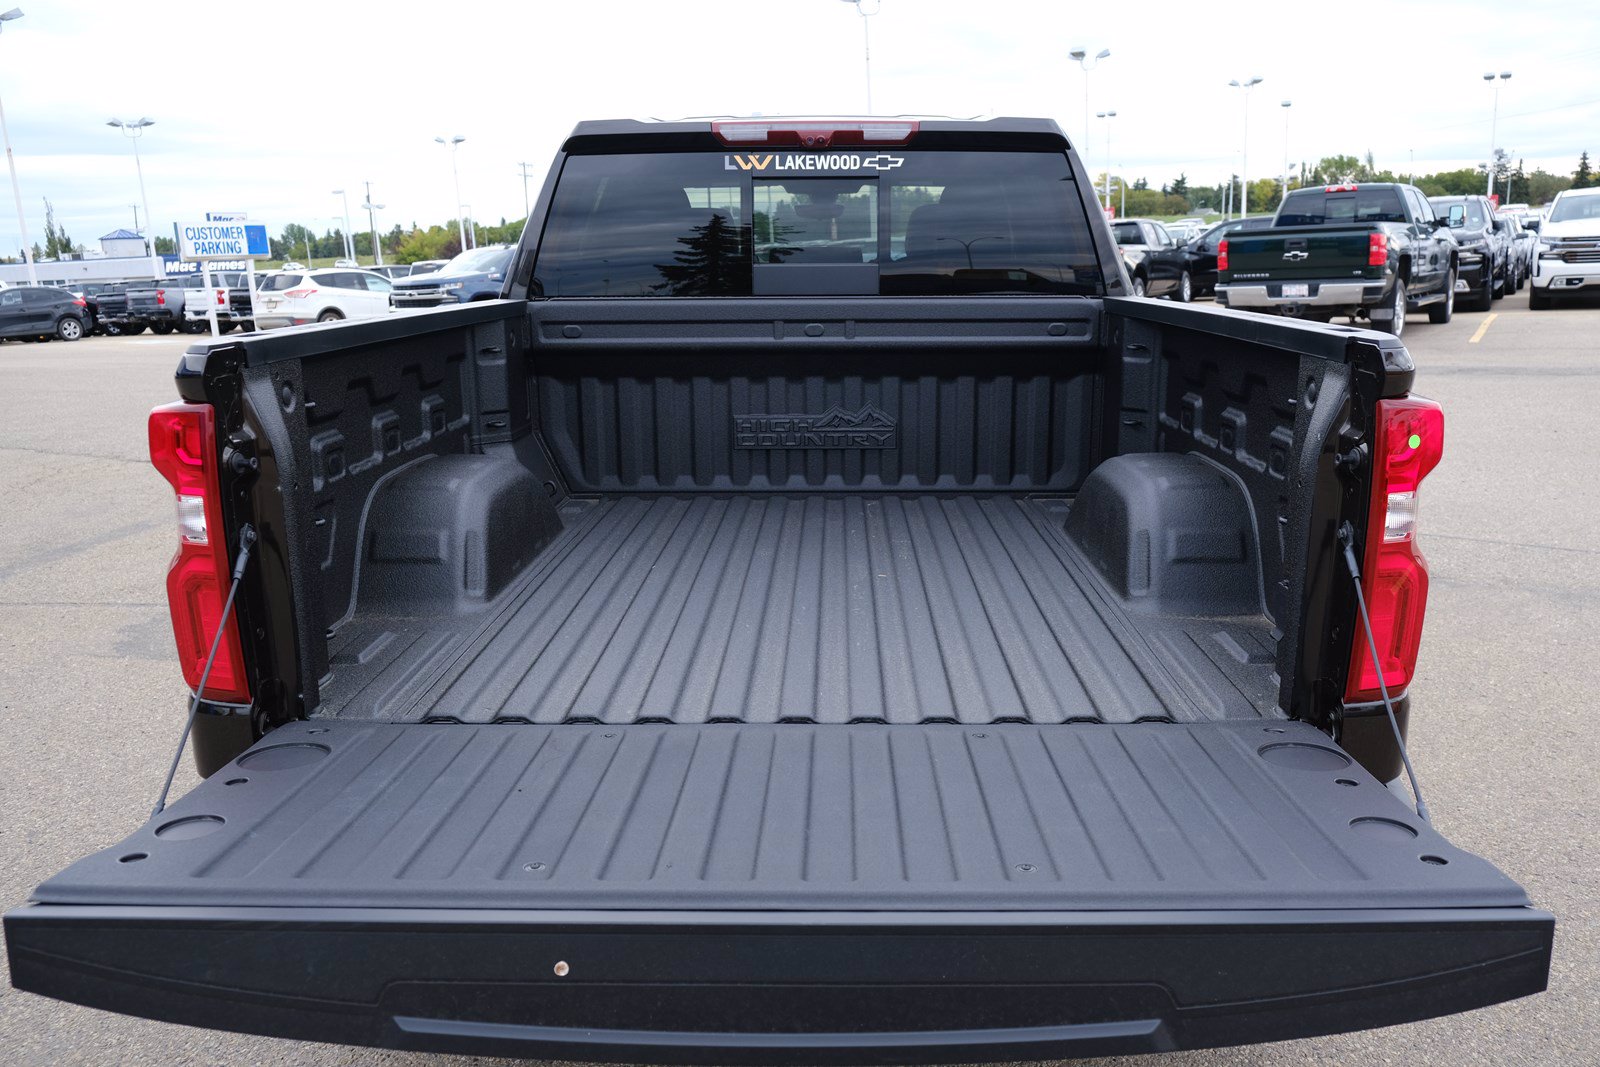 New 2020 Chevrolet Silverado 1500 High Country DEMO | Tonneau Cover 4WD Crew Cab Pickup 2020 Ram 1500 Crew Cab Bed Cover